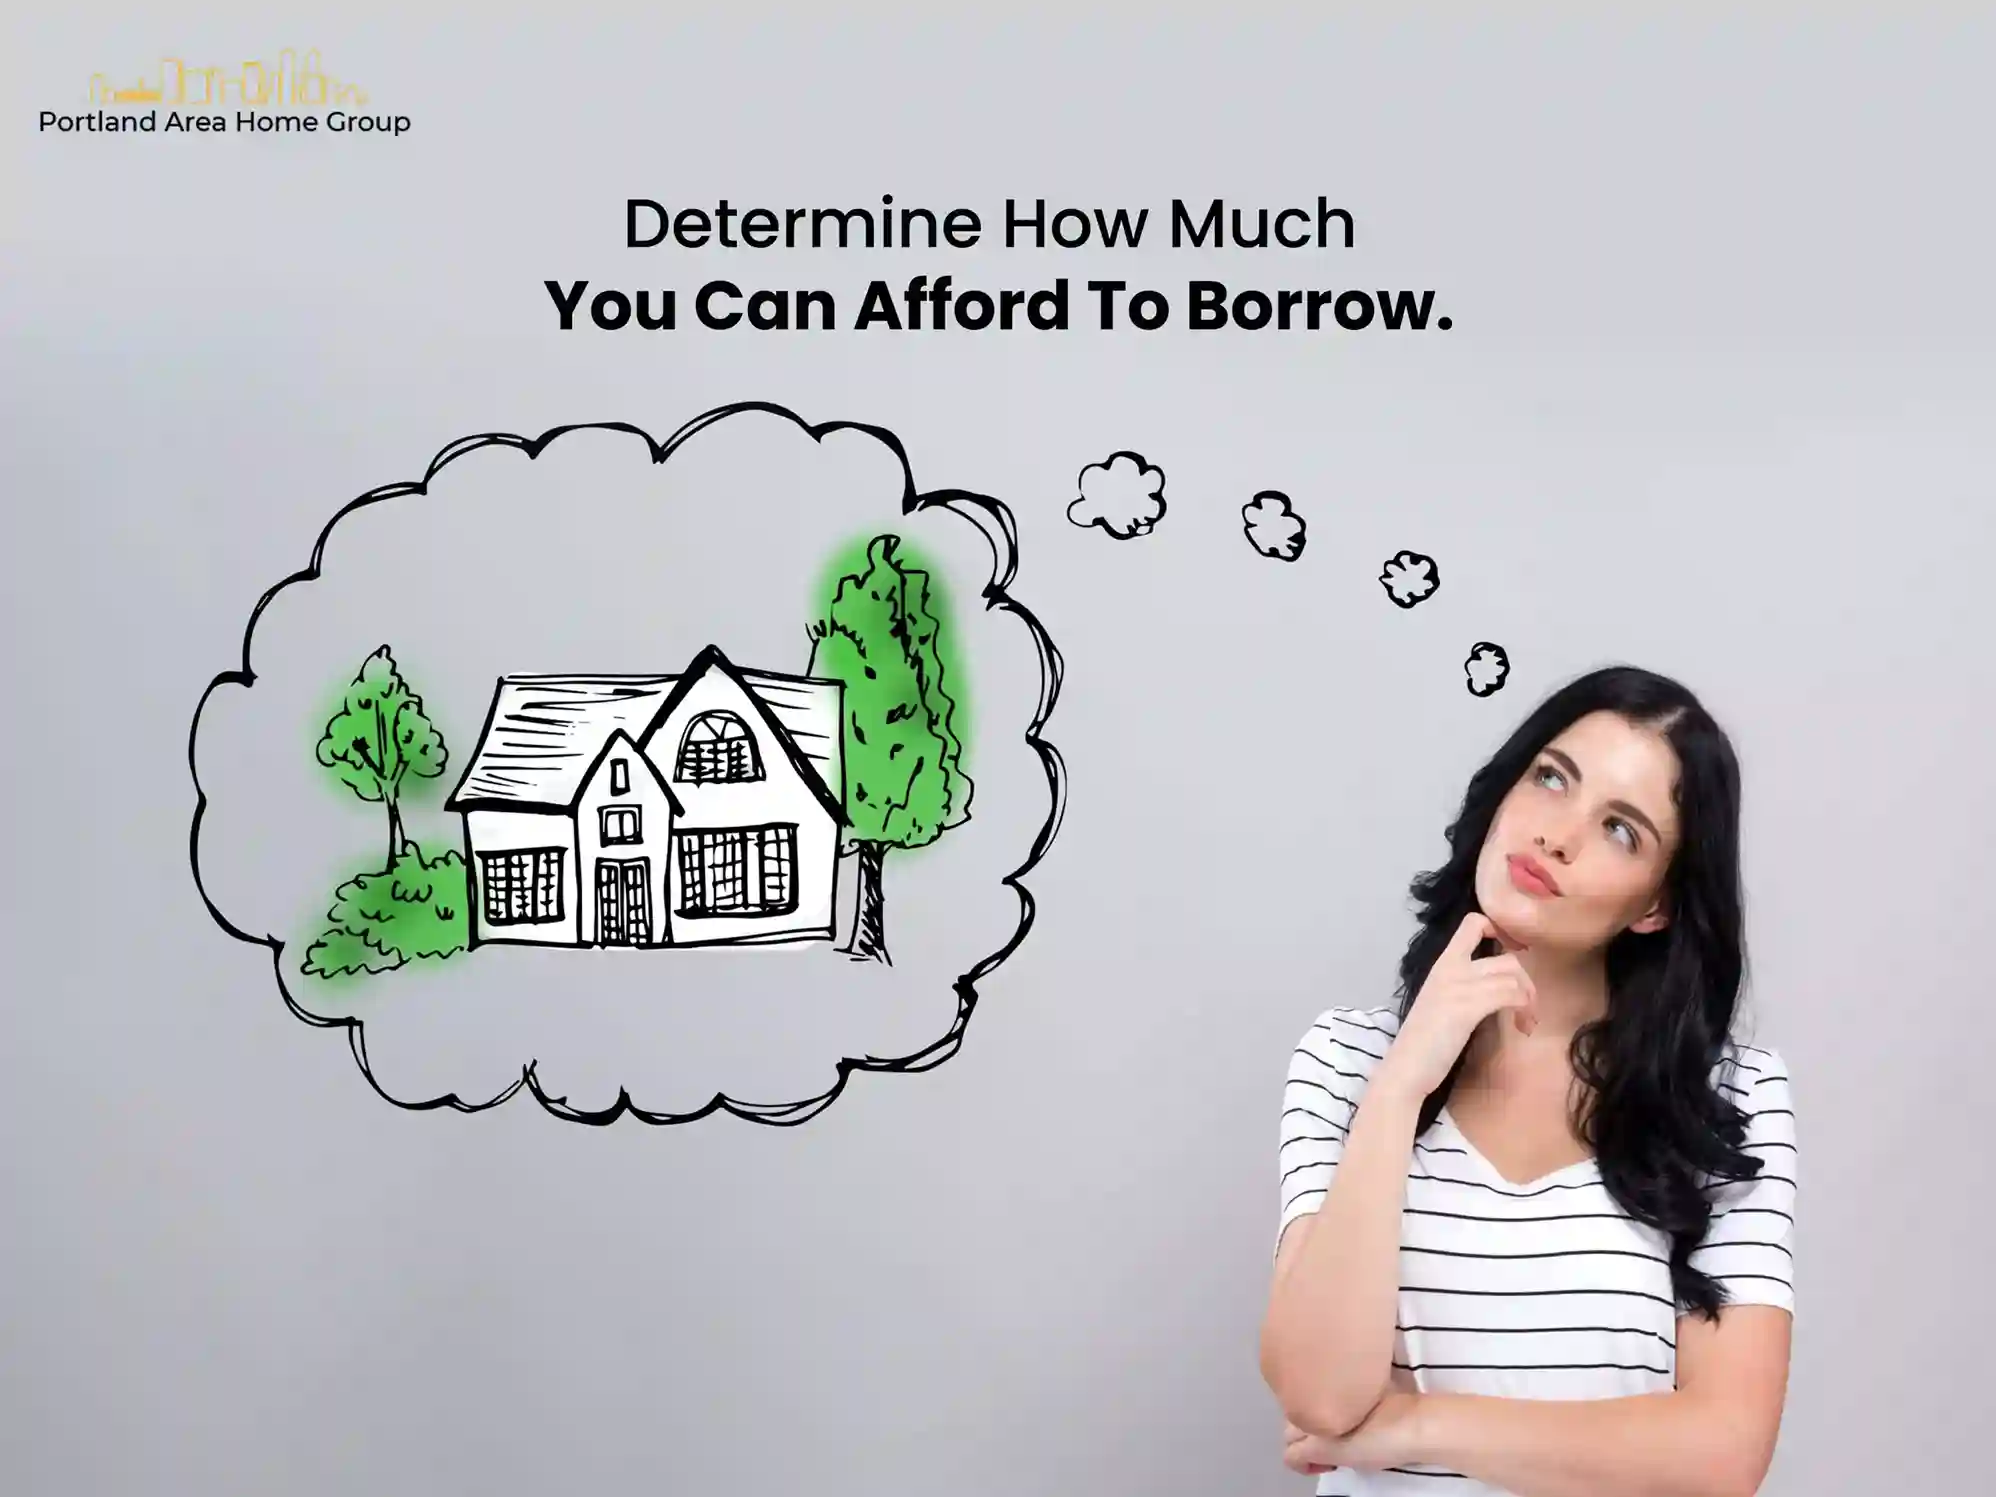 Determine How Much You Can Afford To Borrow